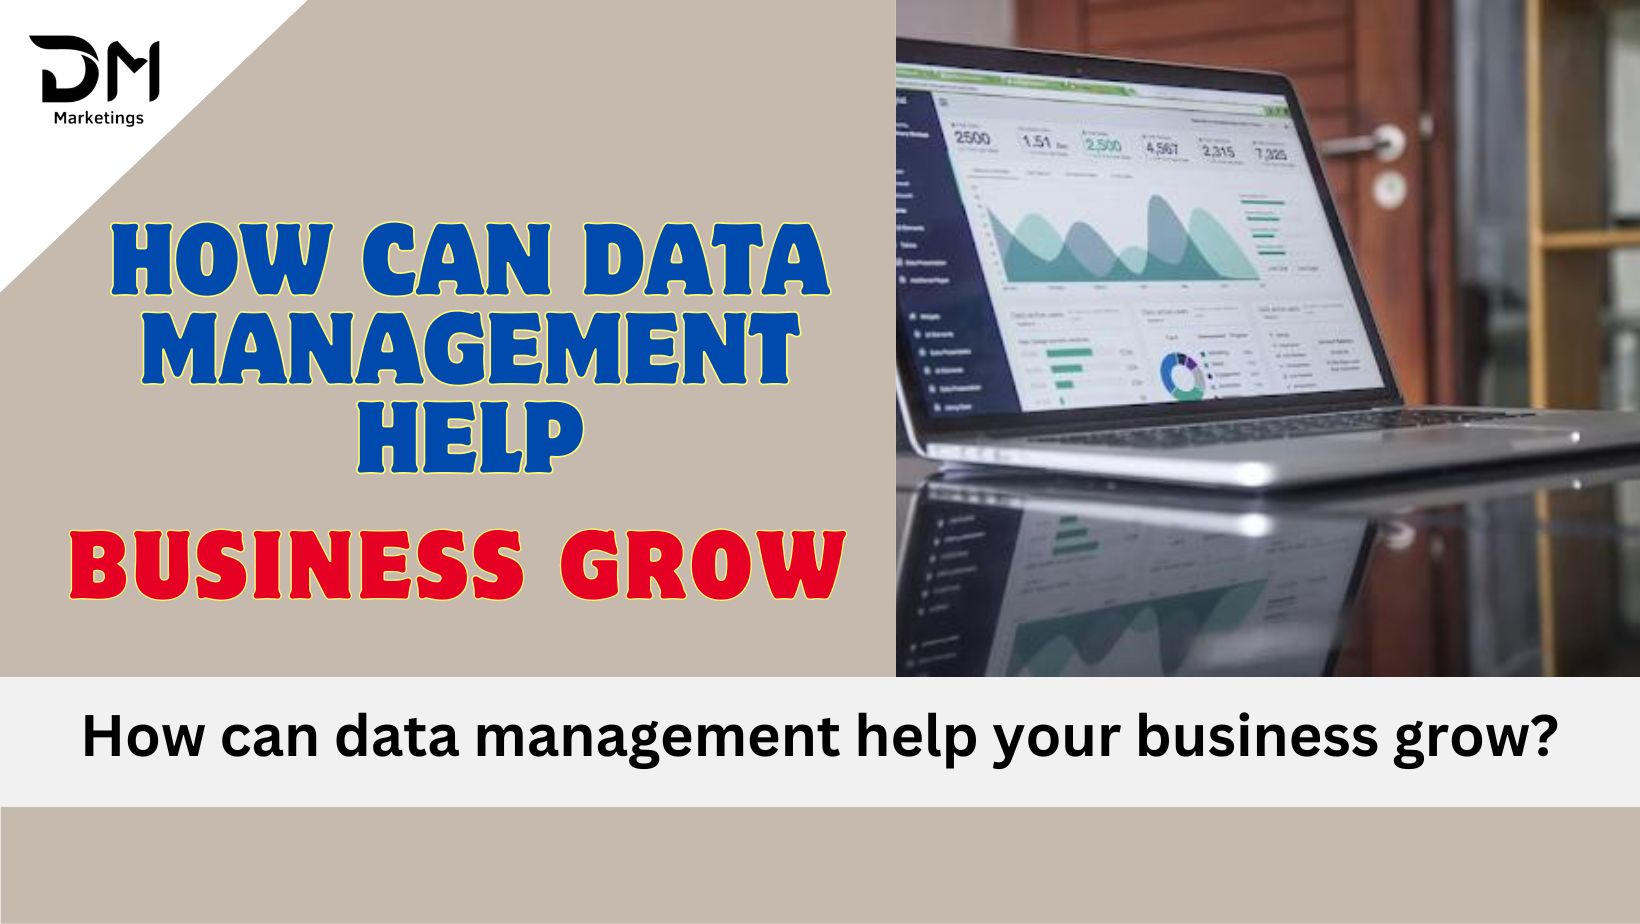 How can data management help